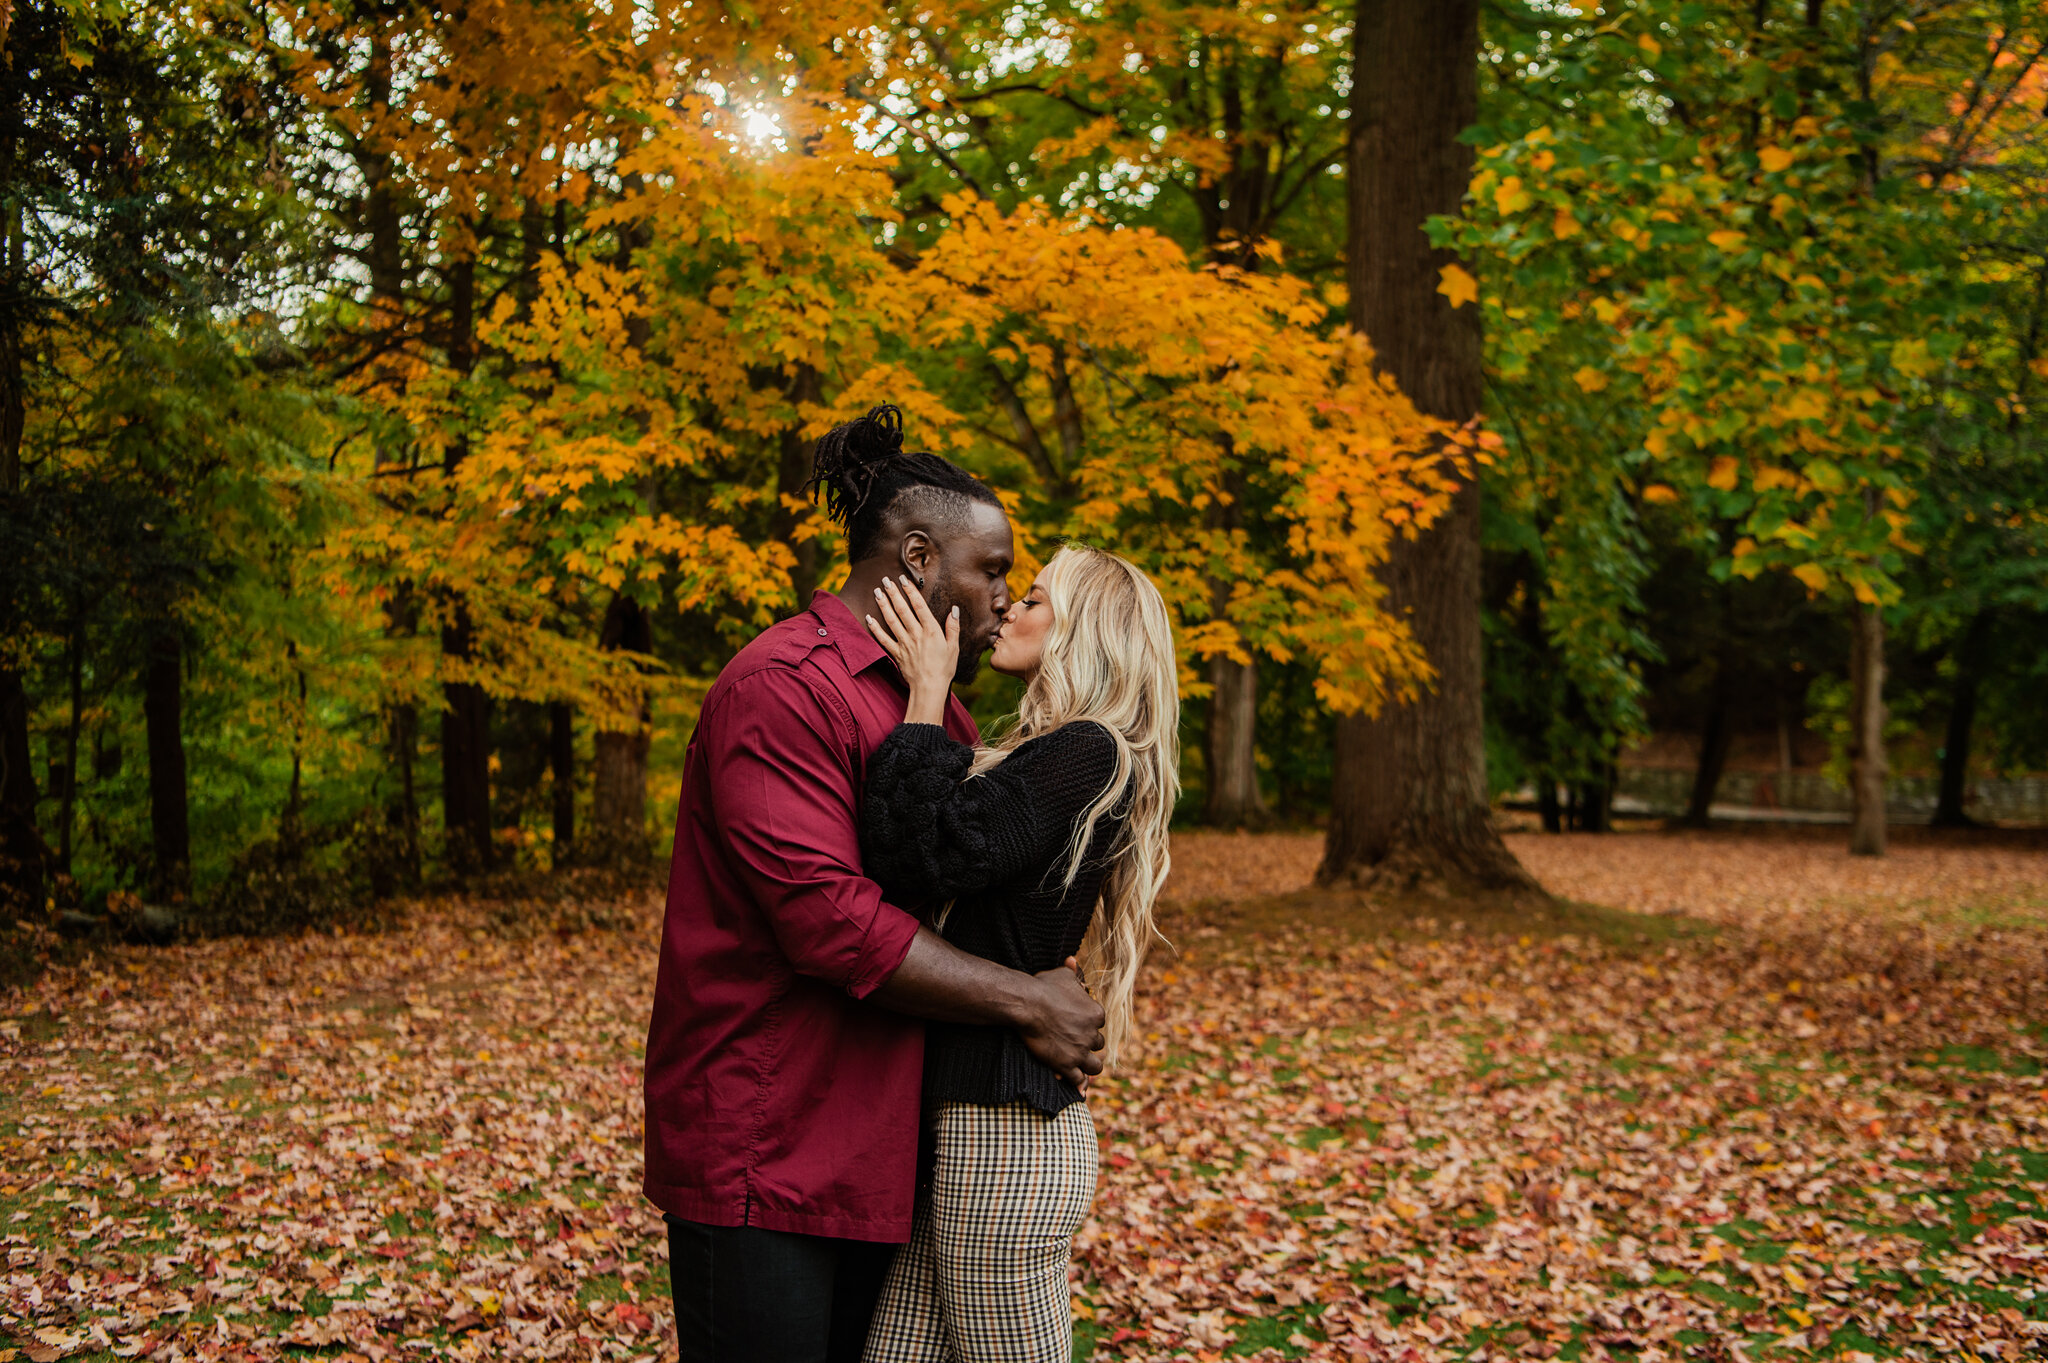 Letchworth_State_Park_Rochester_Couples_Session_JILL_STUDIO_Rochester_NY_Photographer_9268.jpg